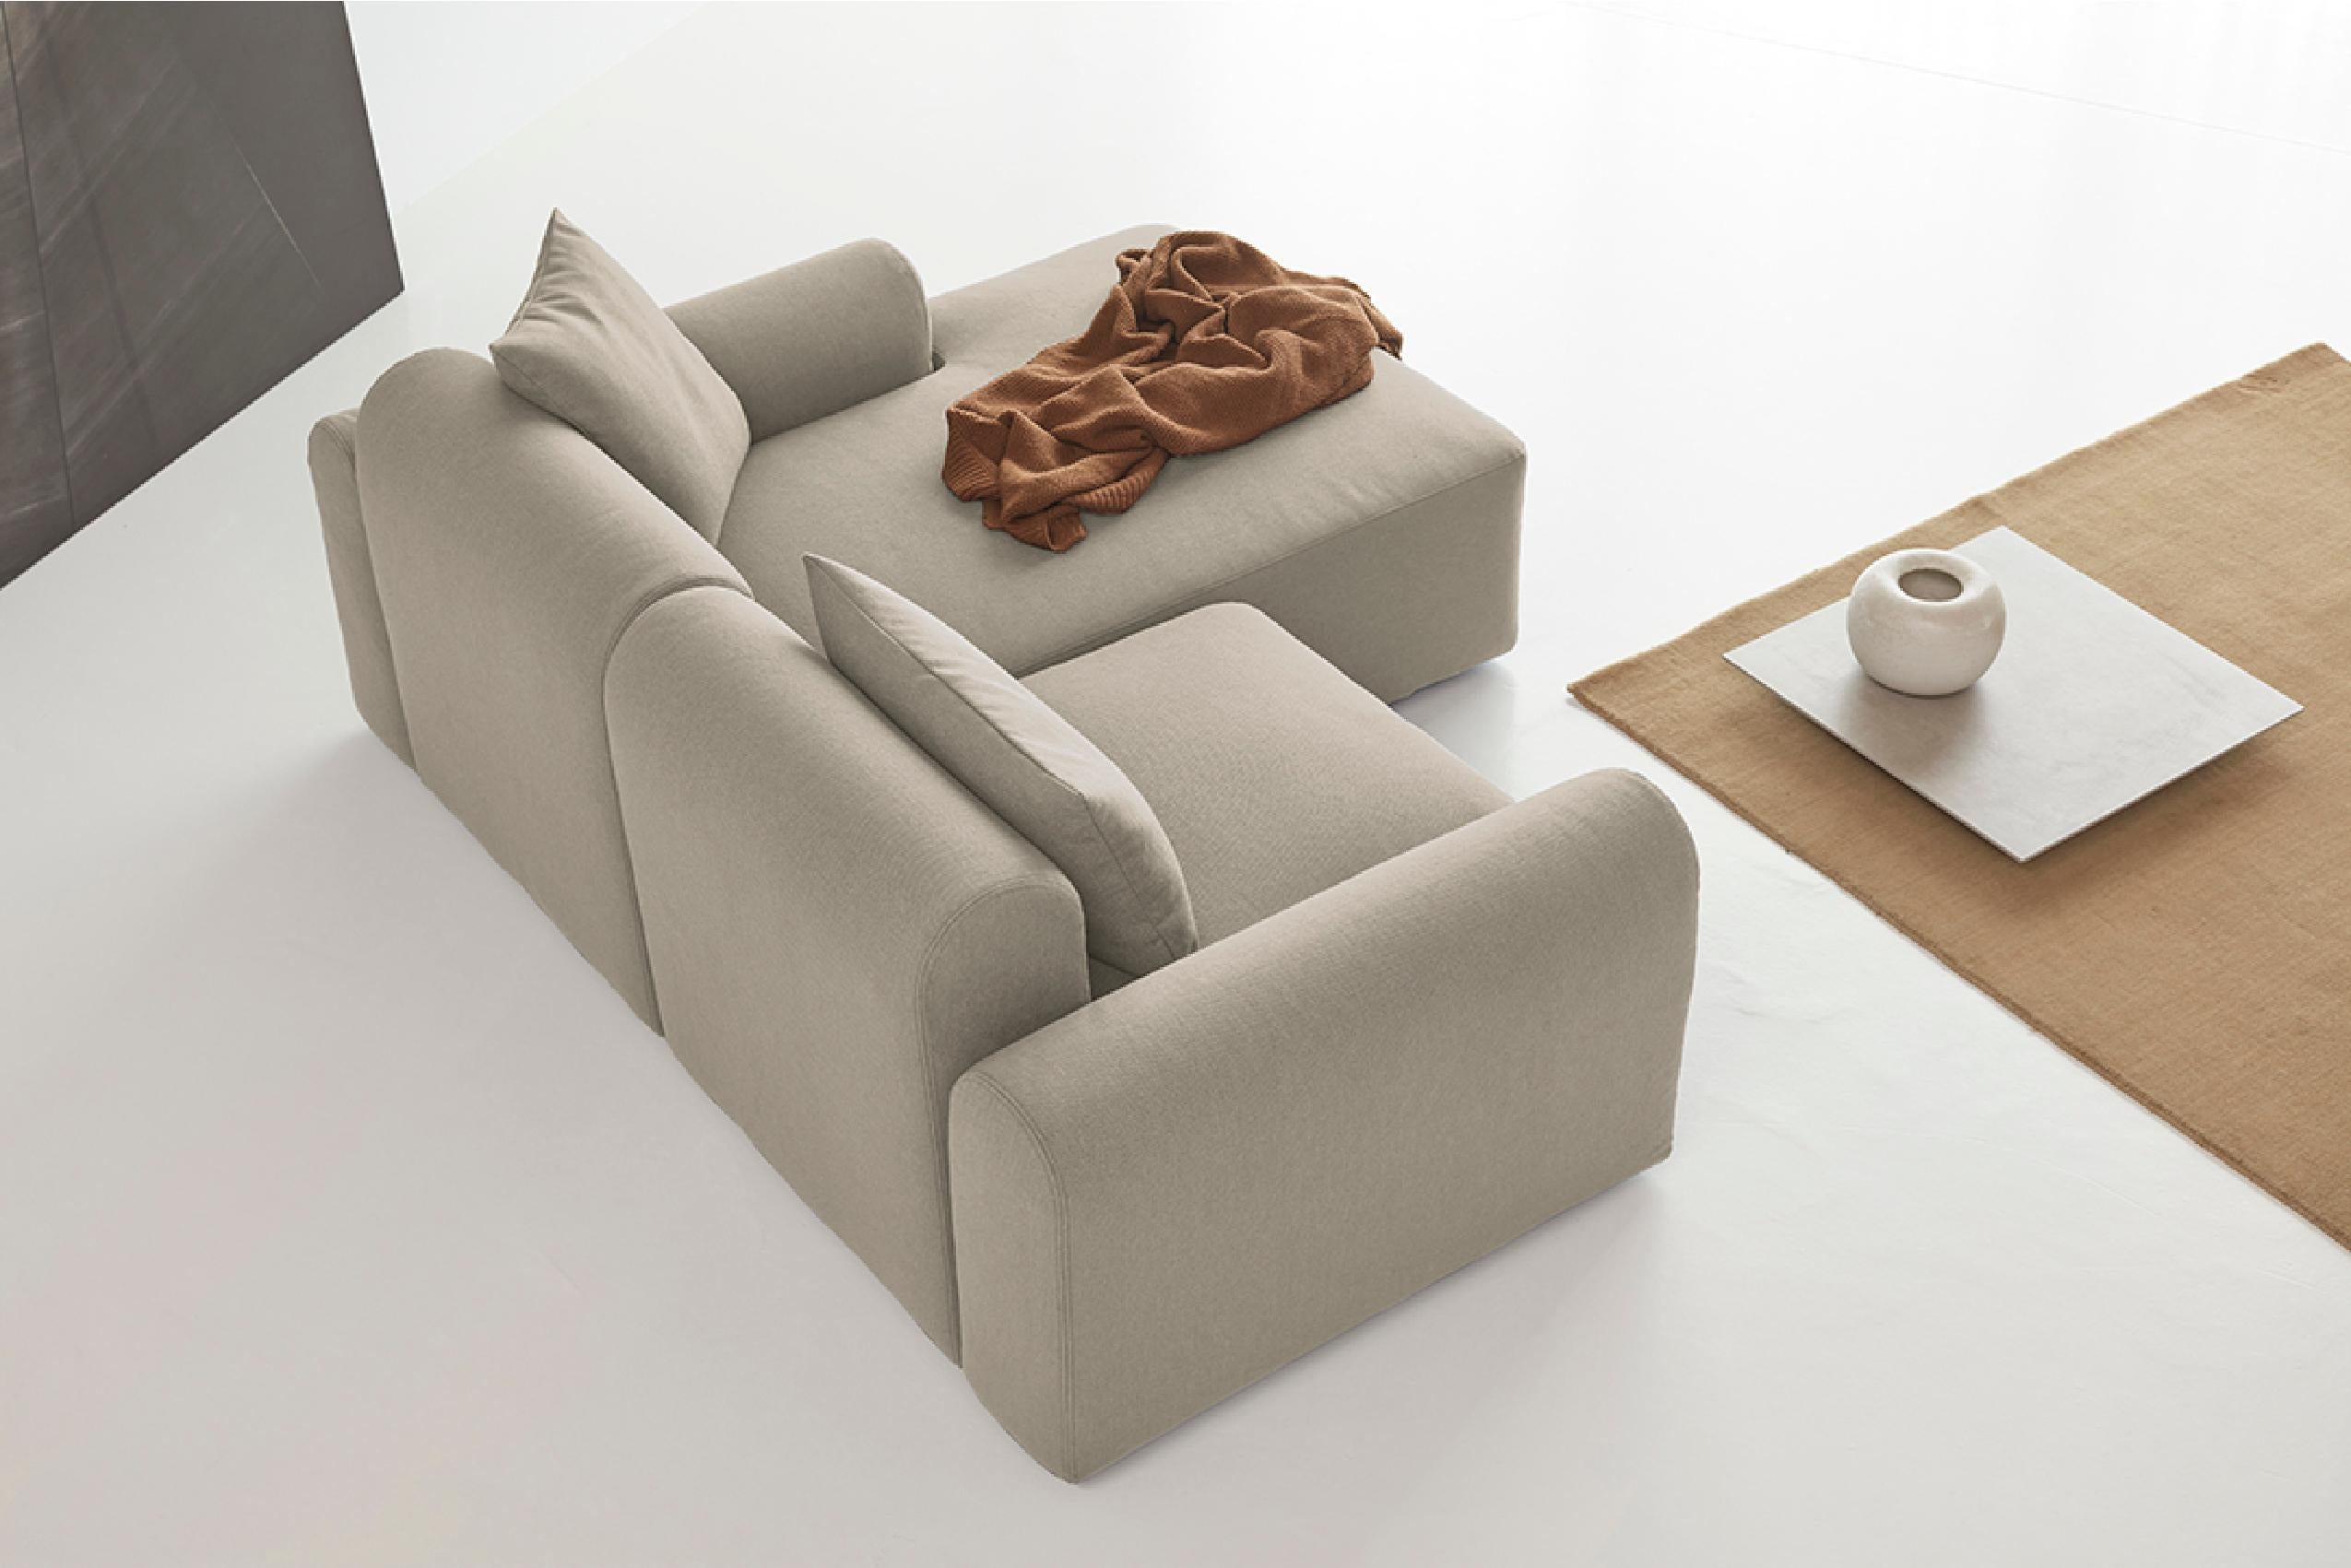 The Ela Chaise+1 epitomizes sustainable design, seamlessly blending contemporary elegance with purposeful features. As a practical and modular OEM product, it prioritizes exceptional comfort and longevity. The removable and washable covers